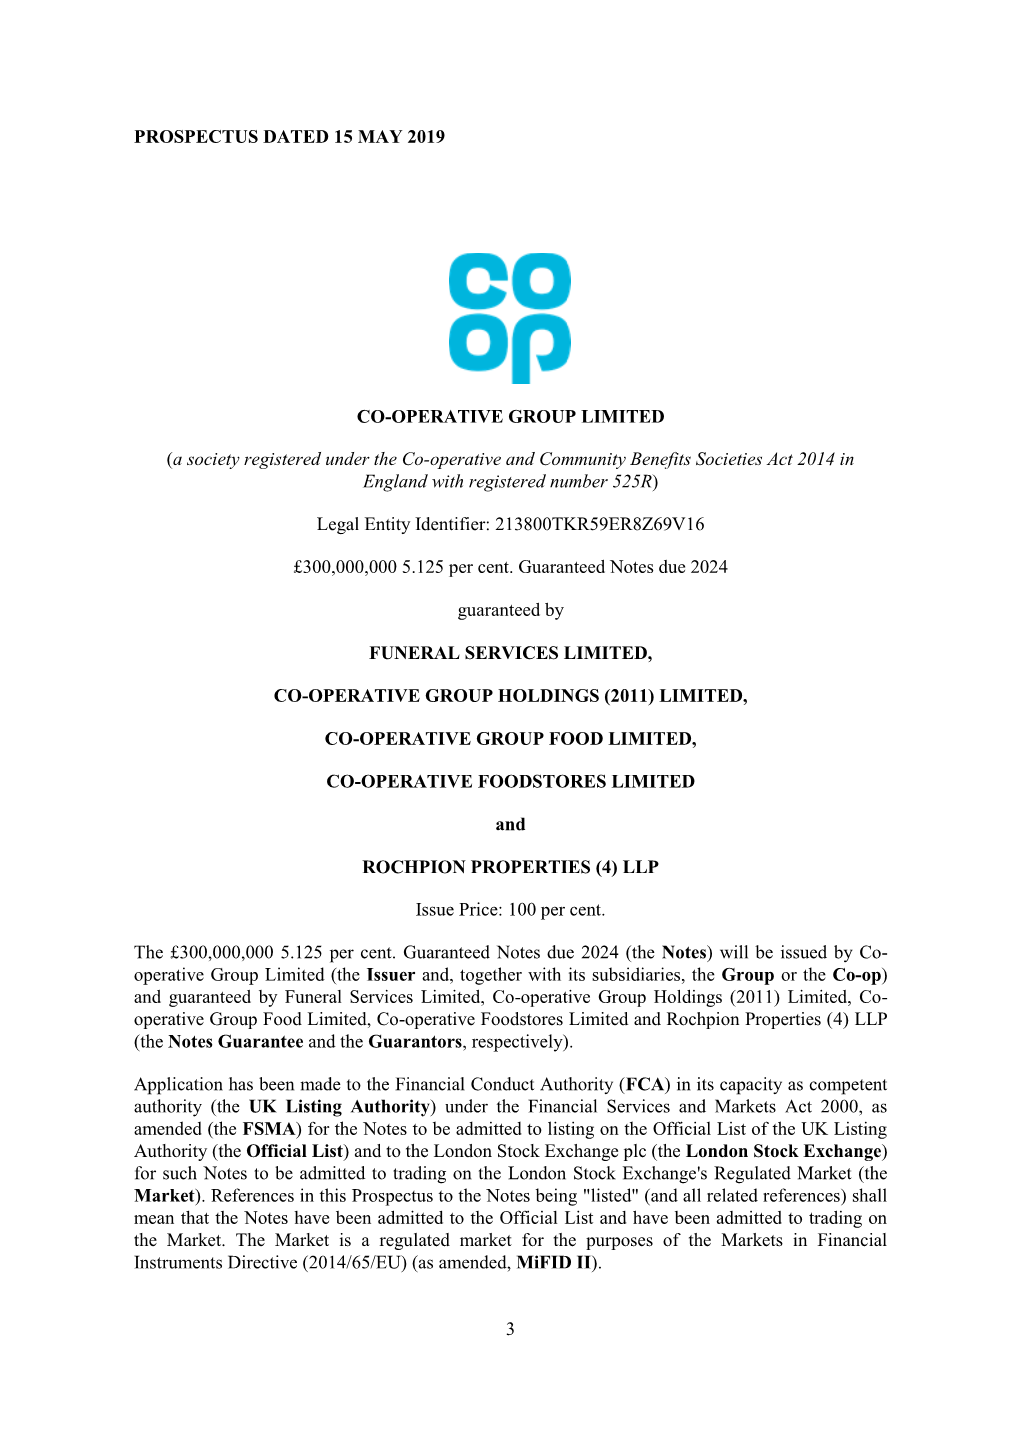 3 PROSPECTUS DATED 15 MAY 2019 CO-OPERATIVE GROUP LIMITED (A Society Registered Under the Co-Operative and Community Benefits So